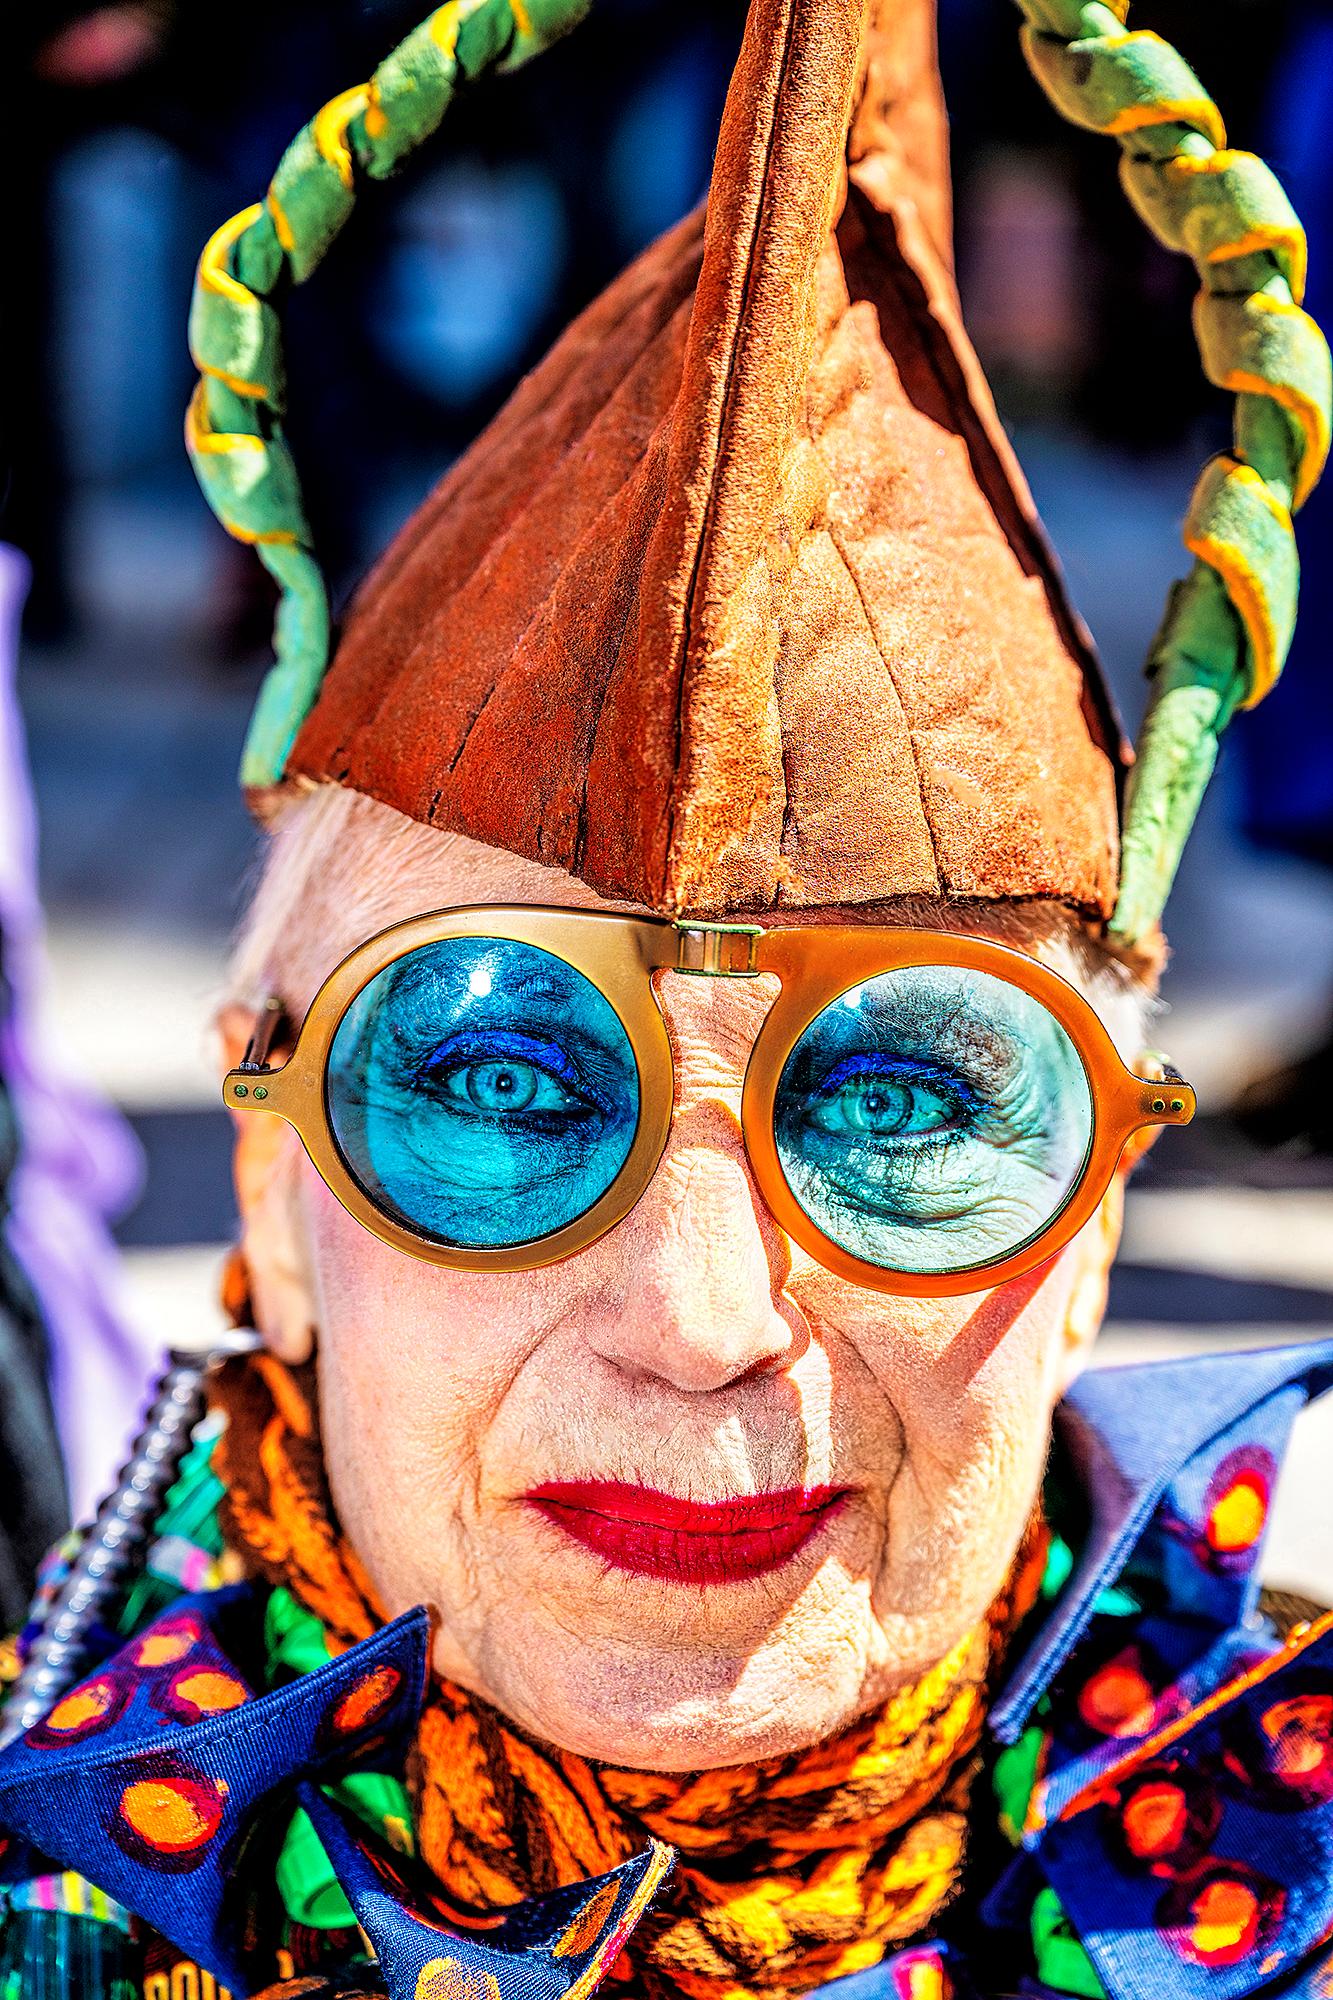 Mitchell Funk Portrait Photograph - Whimsical Woman with Colorfully Fanciful Outfit Blue Eyeglasses